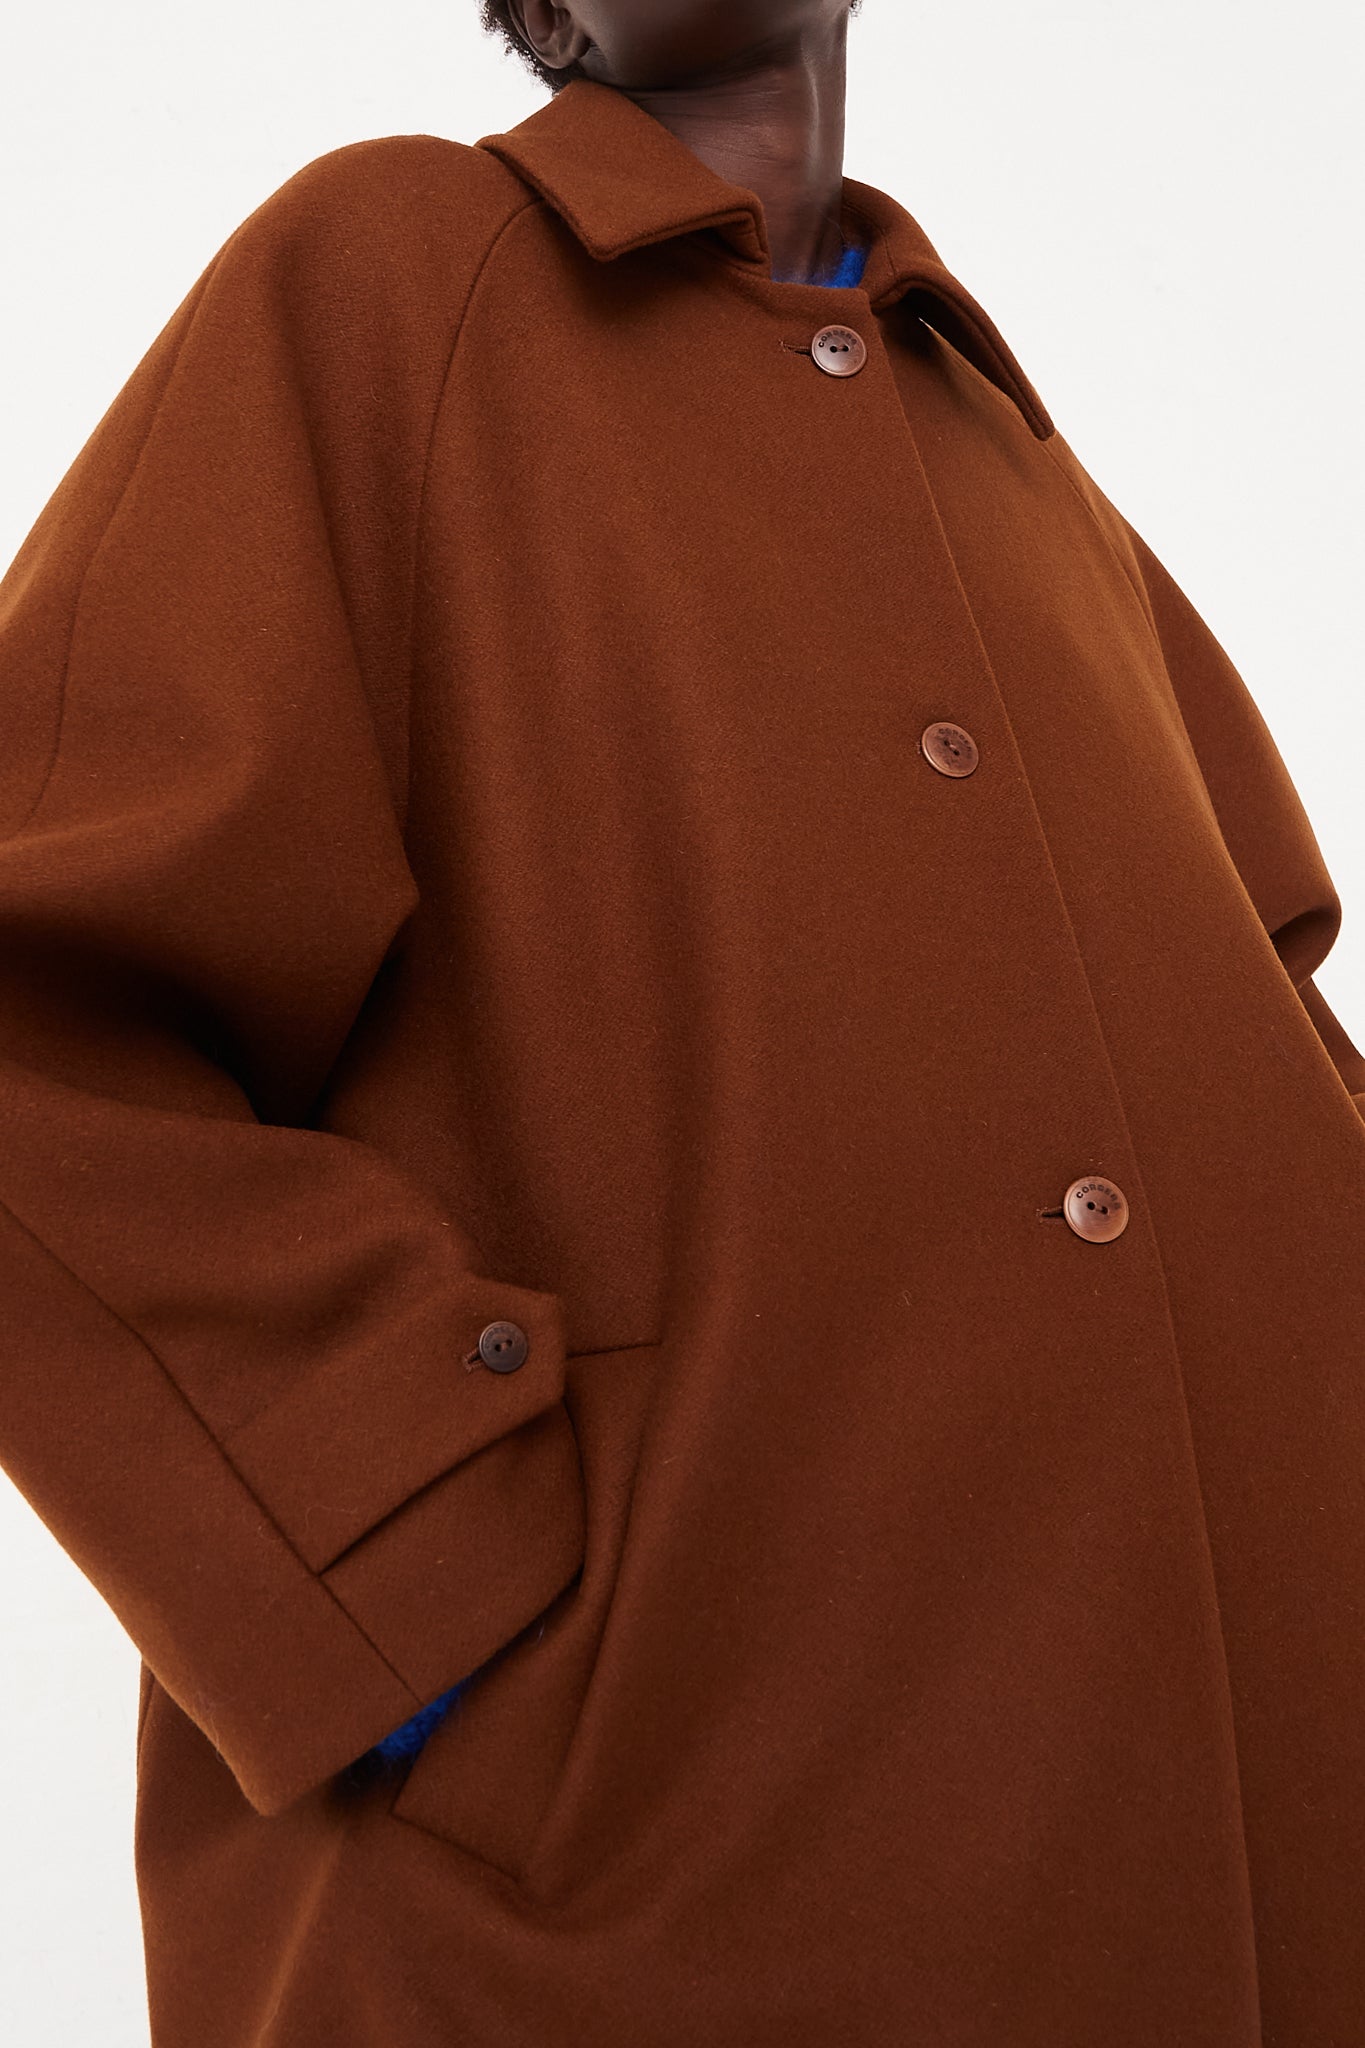 CORDERA Wool Coat Camel | Oroboro Store | Front image of coat uploclose buttoned up on model hand in pocket